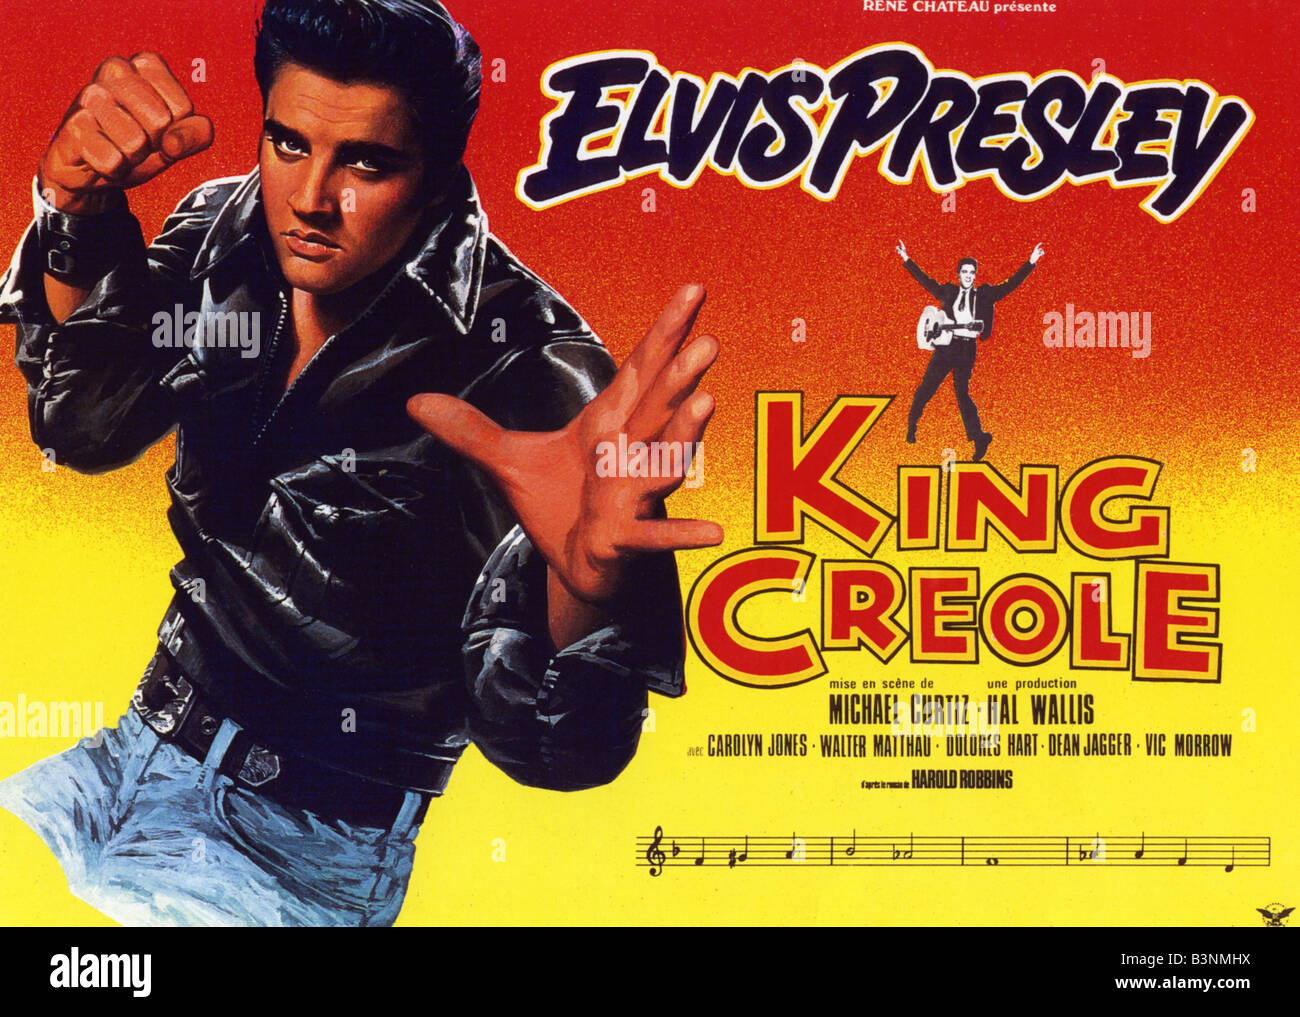 KING CREOLE  Poster for 1958 Paramount film with Elvis Presley Stock Photo